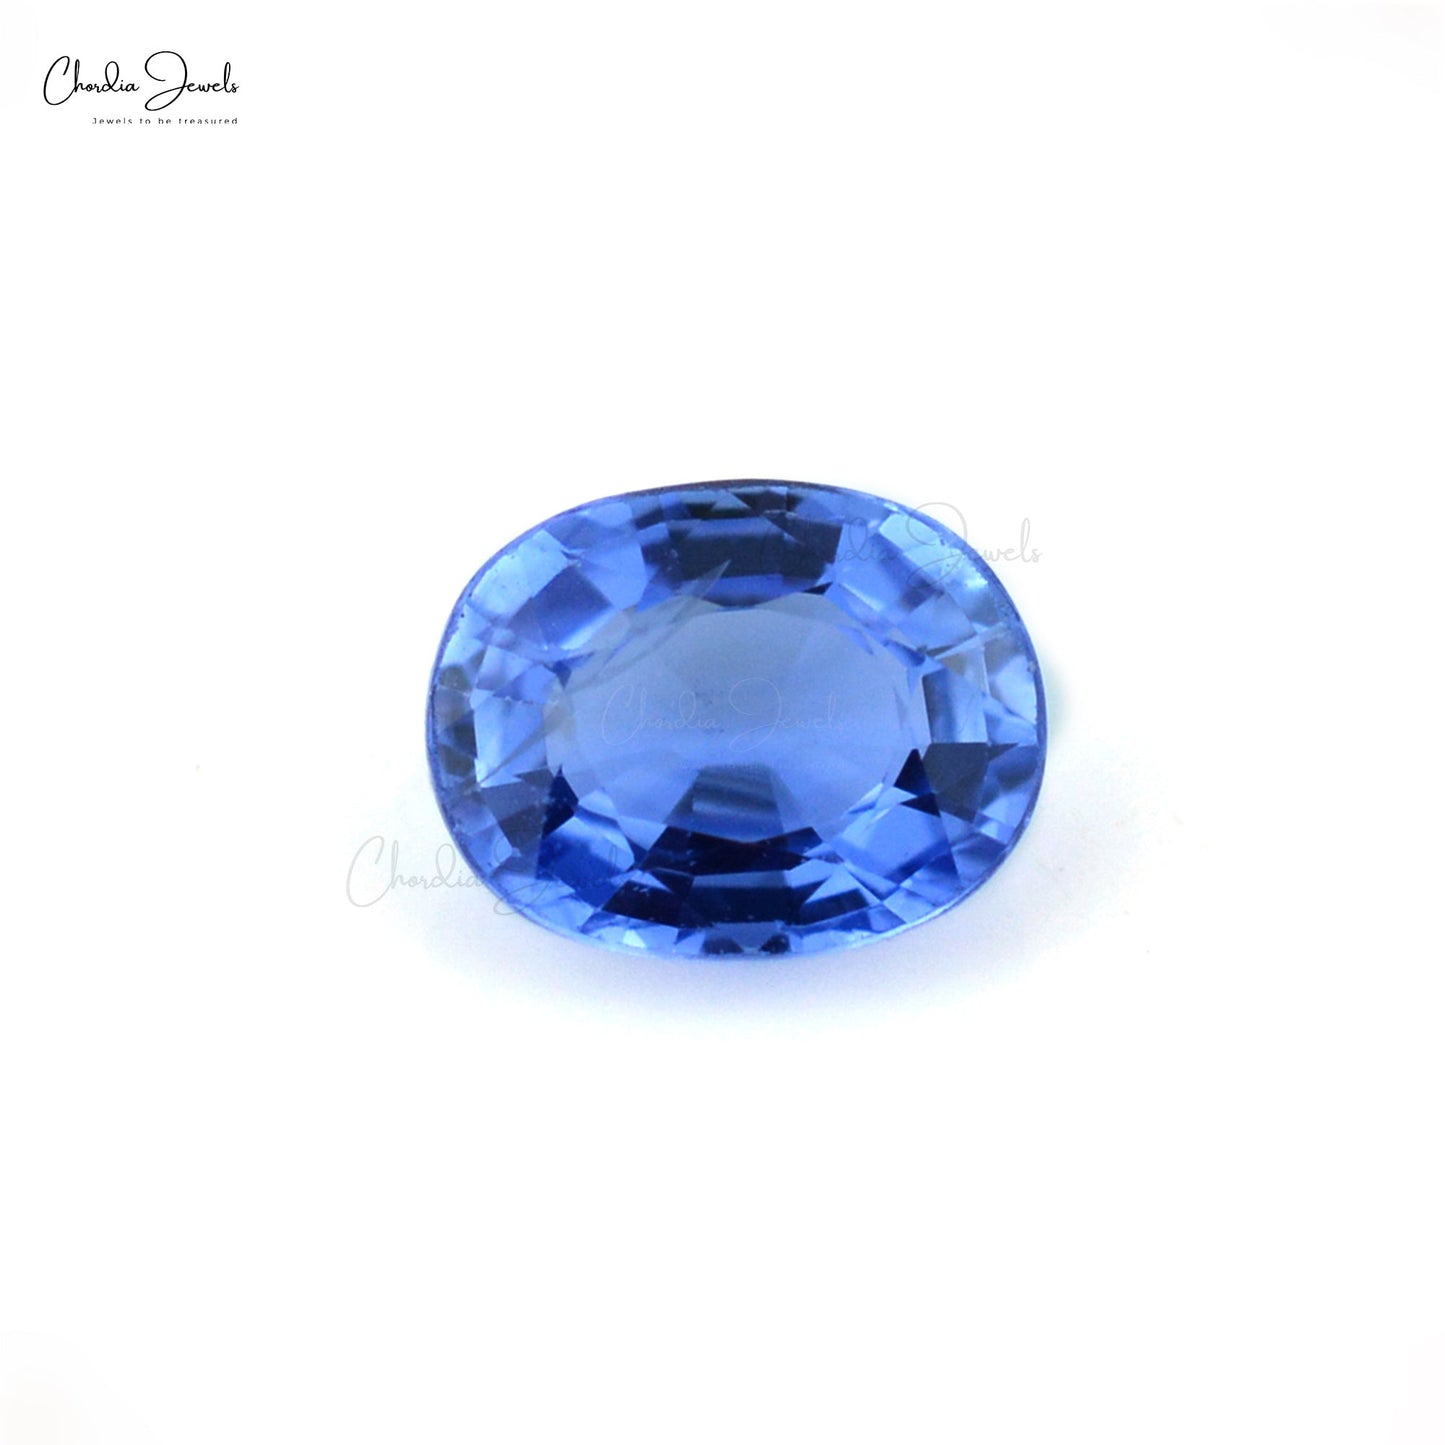 Natural Blue Sapphire from Chordia Jewels 